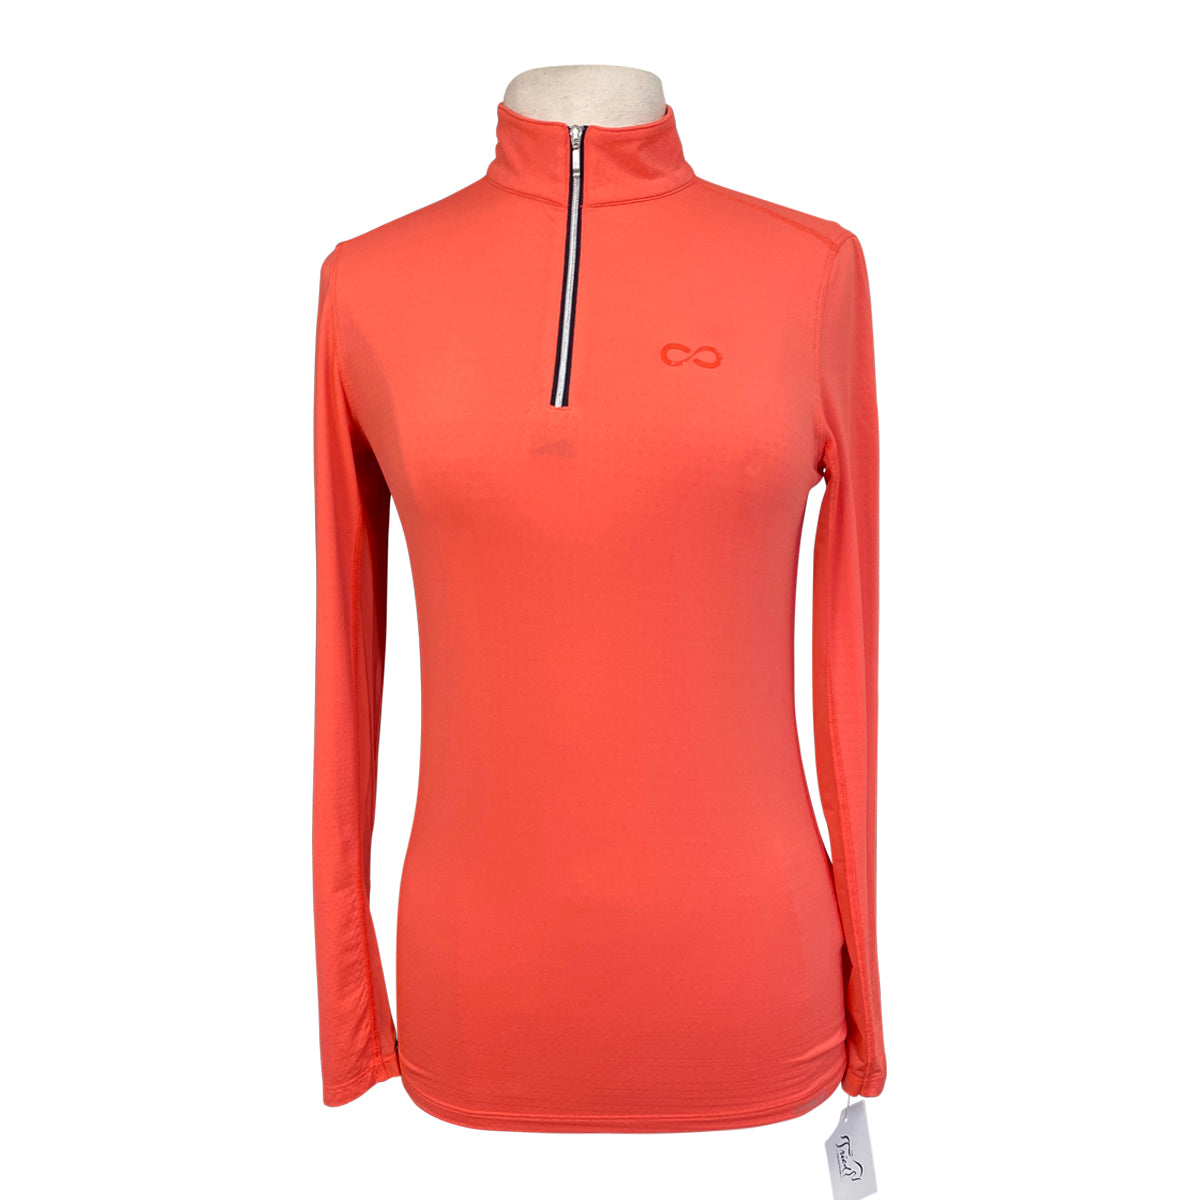 Dover Saddlery Long Sleeve Sunshirt in Coral 